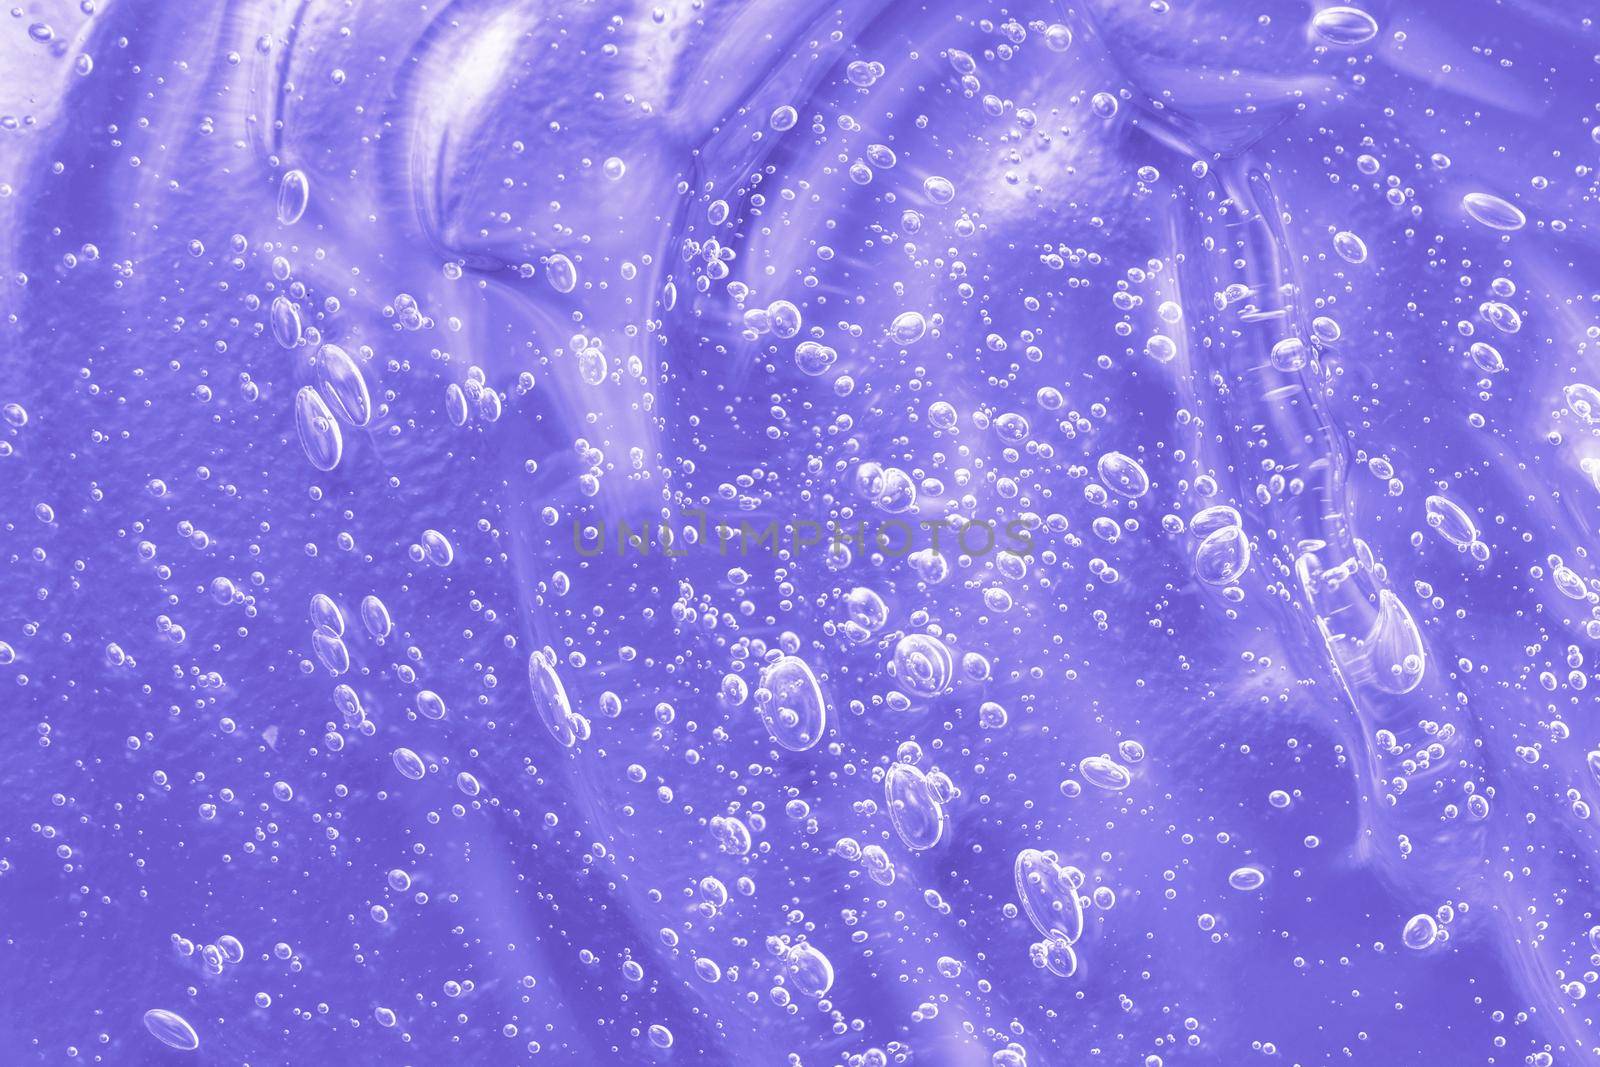 Skincare moisturizing product background. Liquid antibacterial disinfect smear smudge. Cosmetic lilac gel texture with bubbles. Hyaluronic acid clear serum sample. Sanitizer swatch. Close-up, macro.